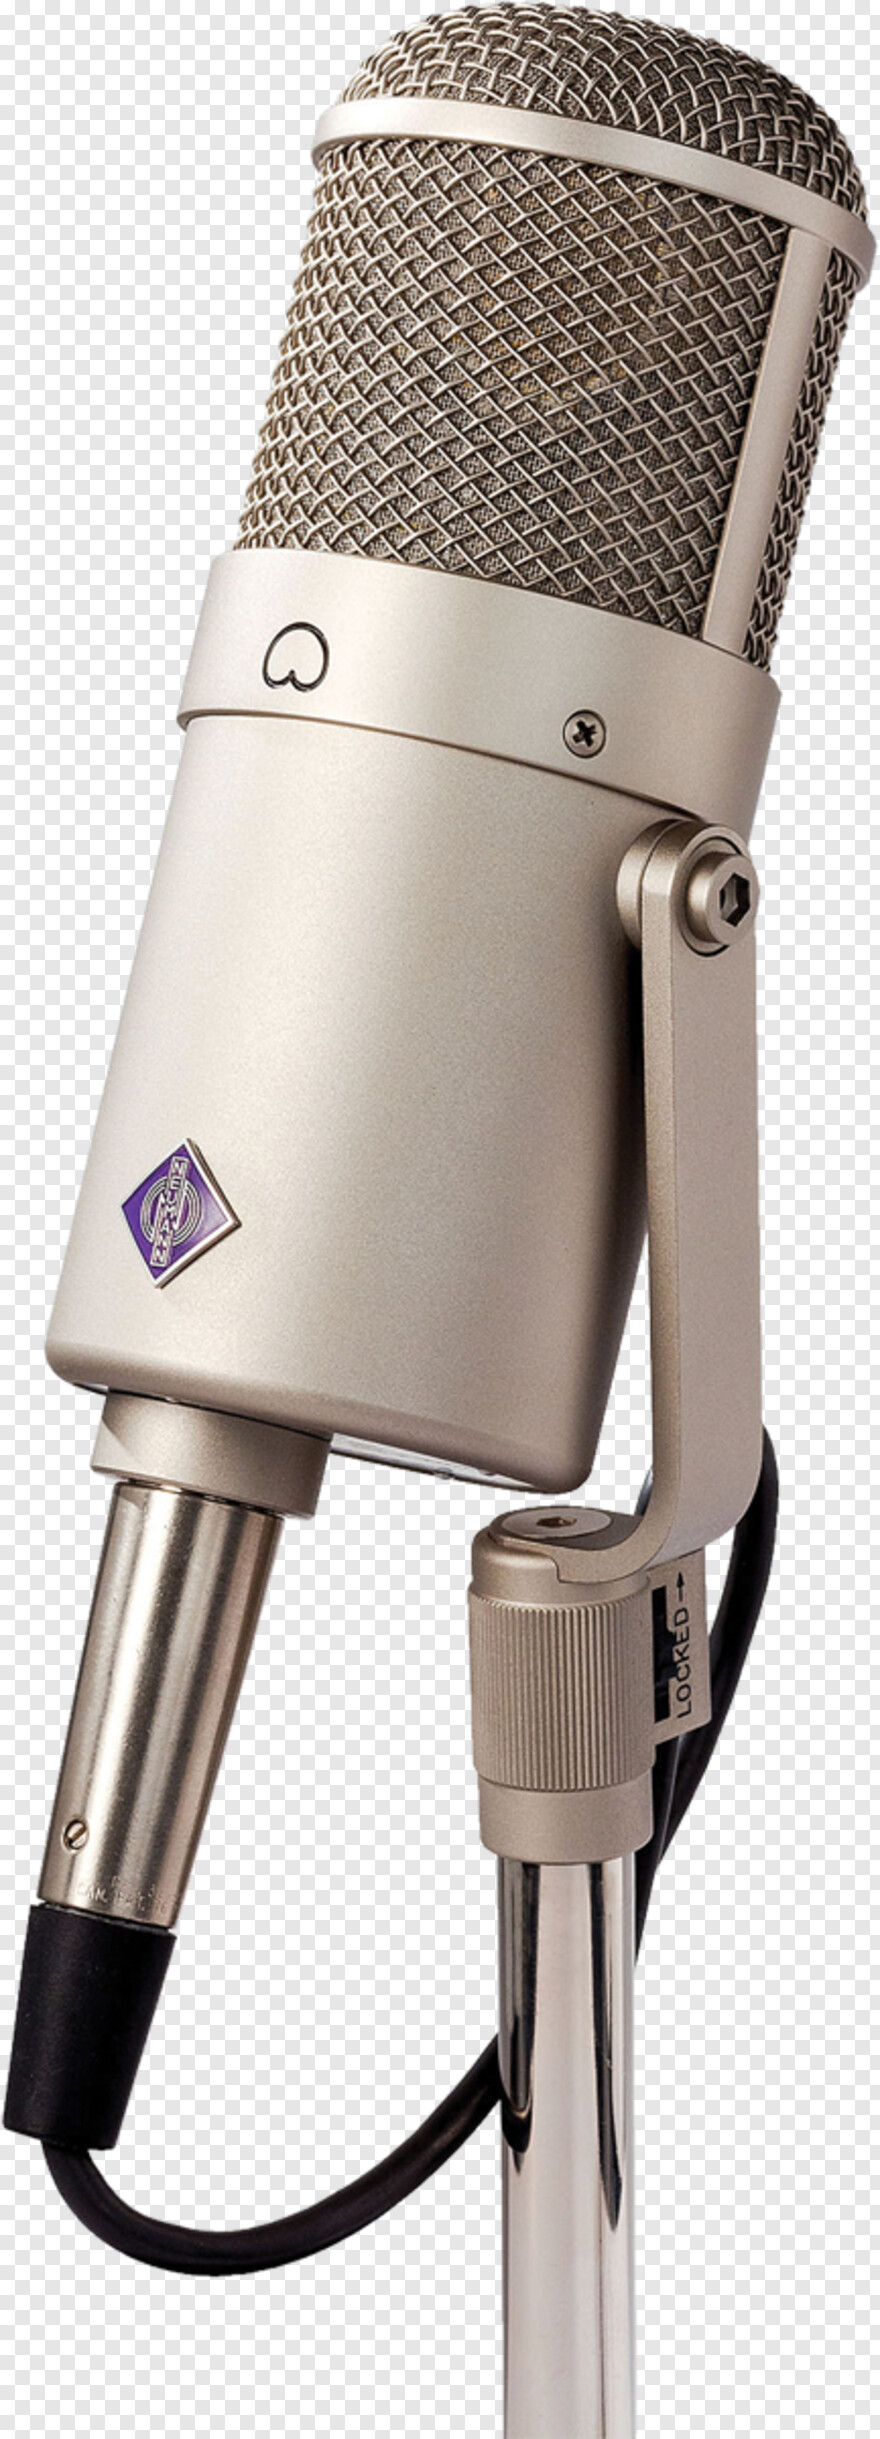 microphone-icon # 371301